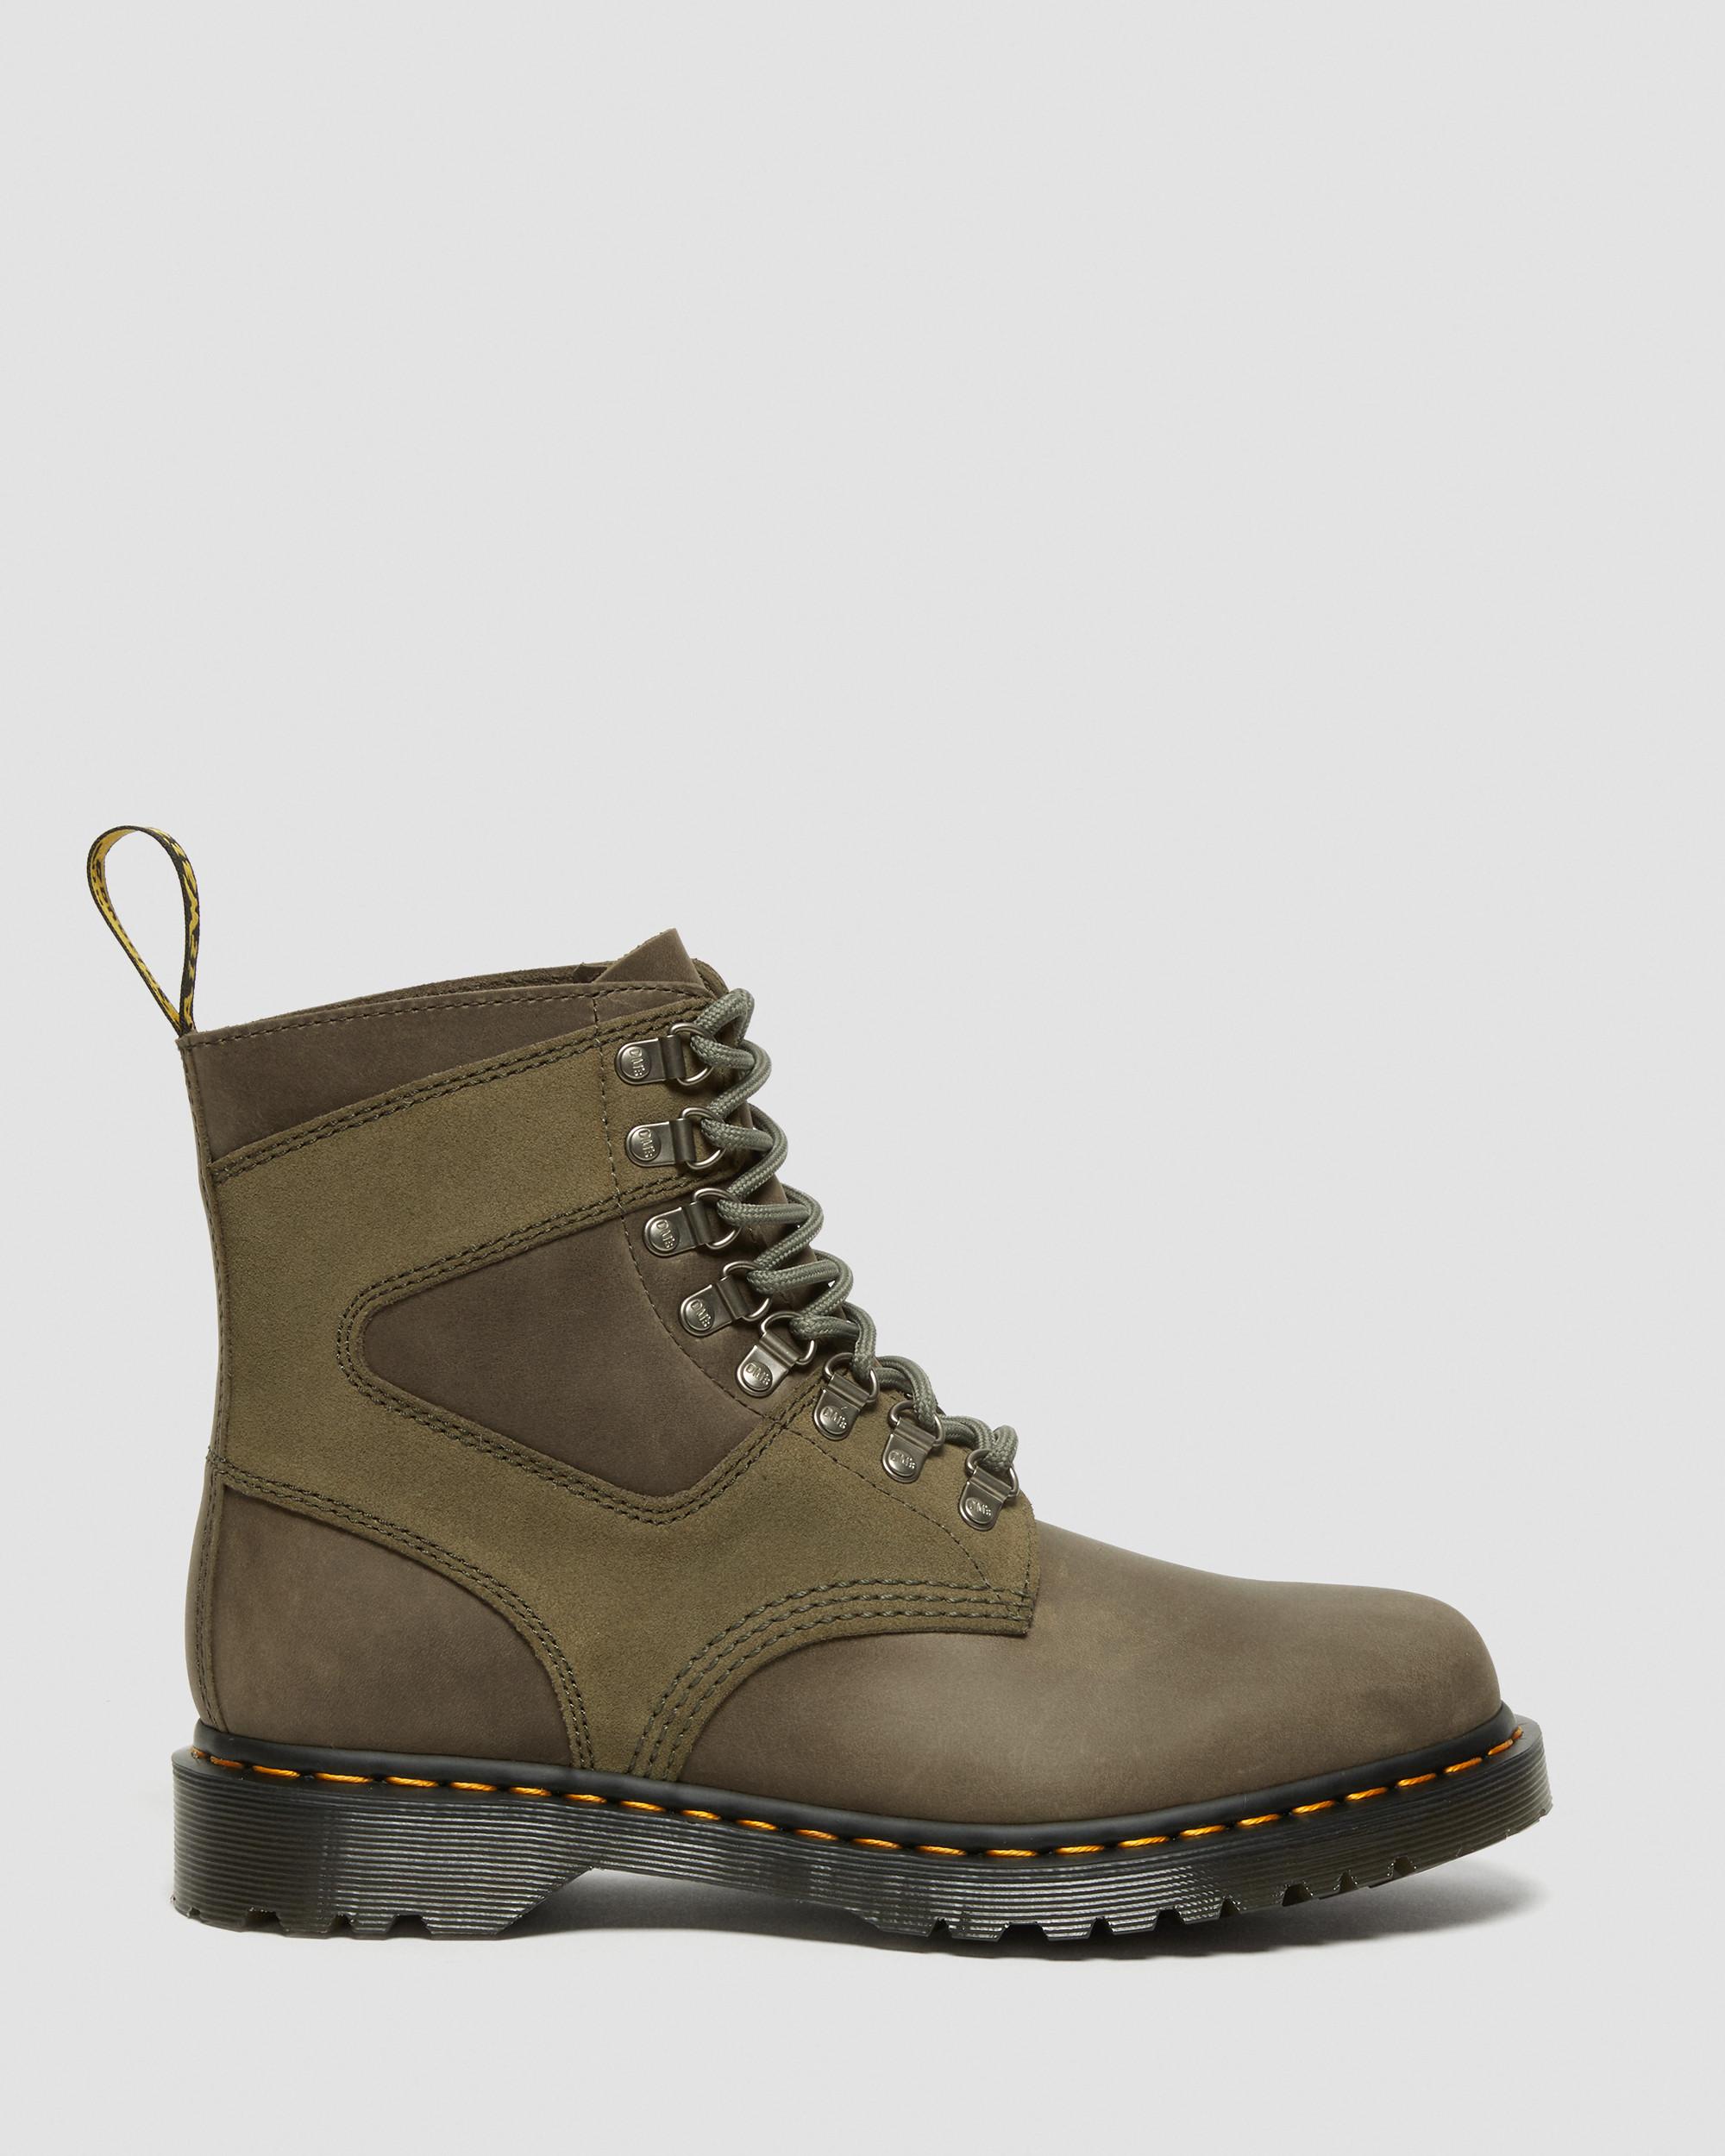 1460 Pascal Leather & Suede Lace Up BootsBotas 1460 Pascal Streeter en ante Dr. Martens